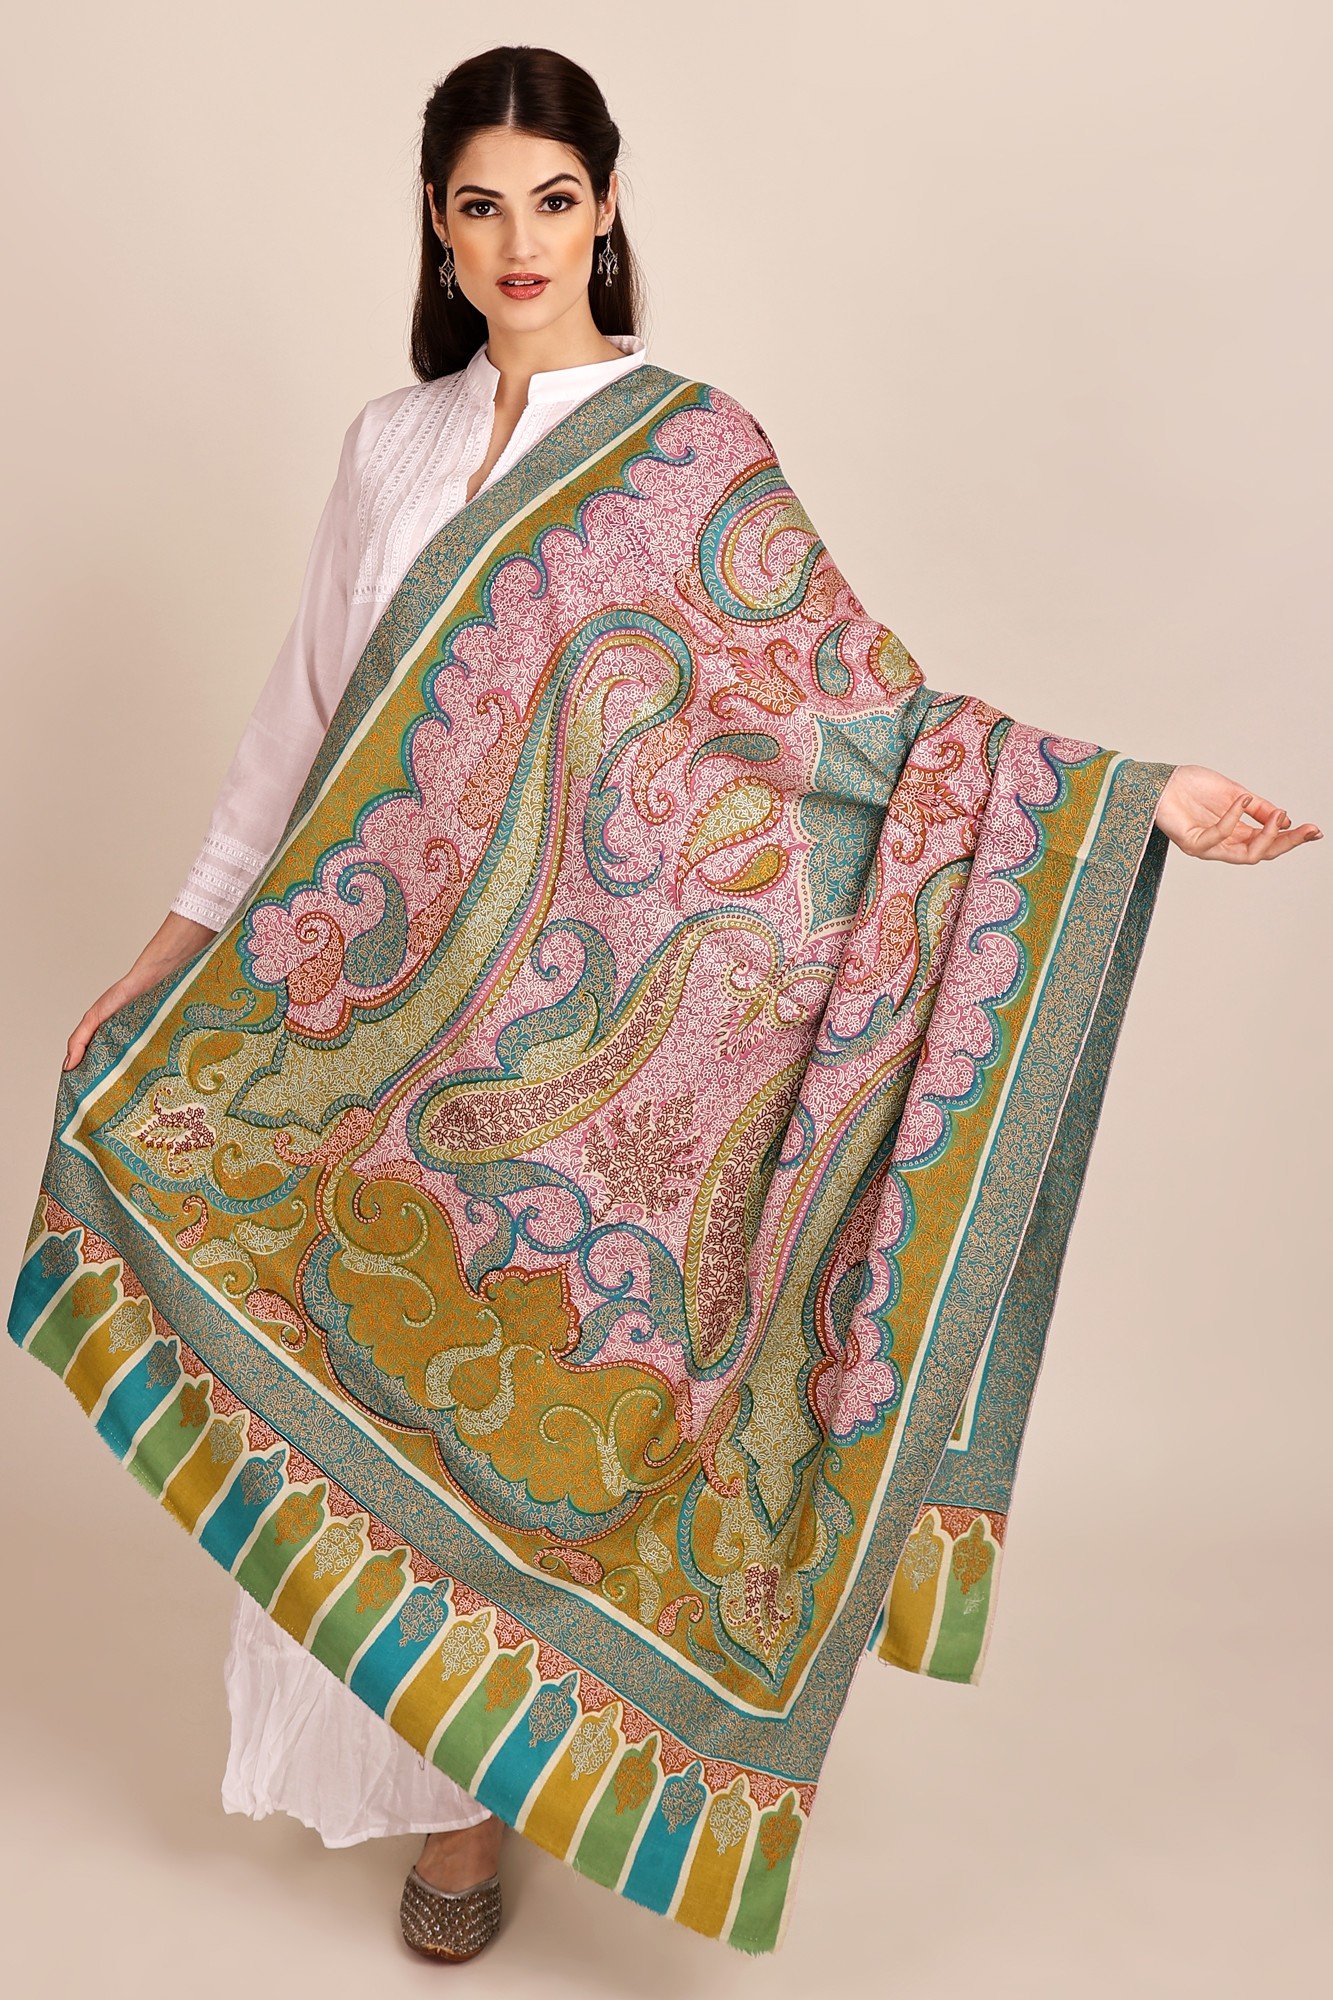 Multi-coloured Pure Pashmina Shawl from Kashmir with Sozni-Embroidery by  Hand | Exotic India Art